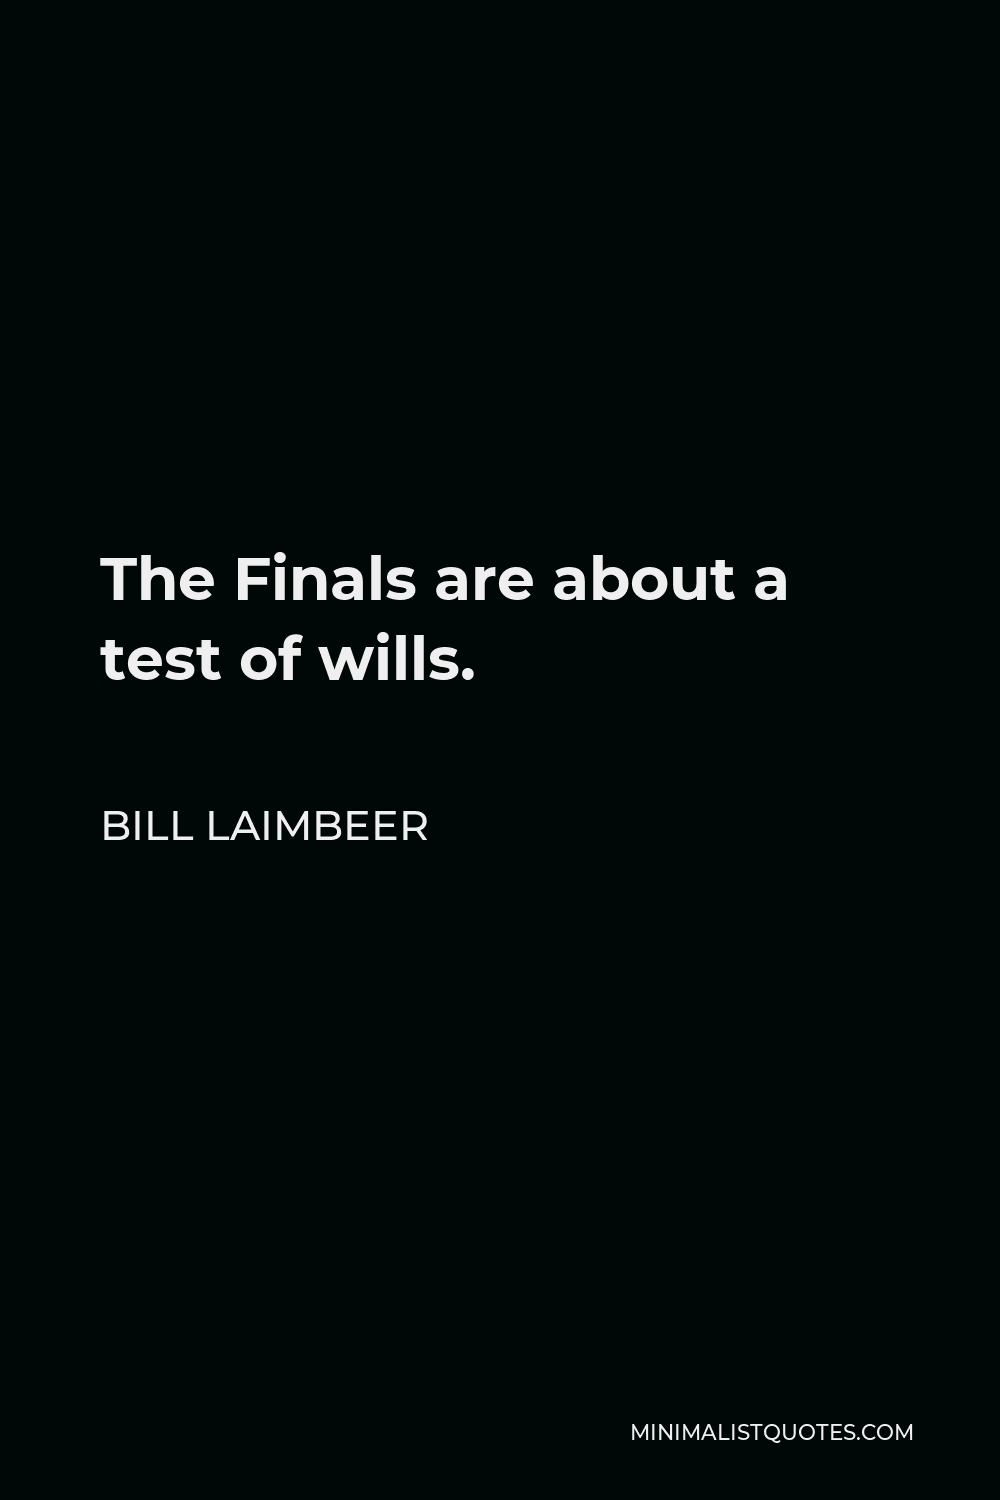 Bill Laimbeer Quote - The Finals are about a test of wills.